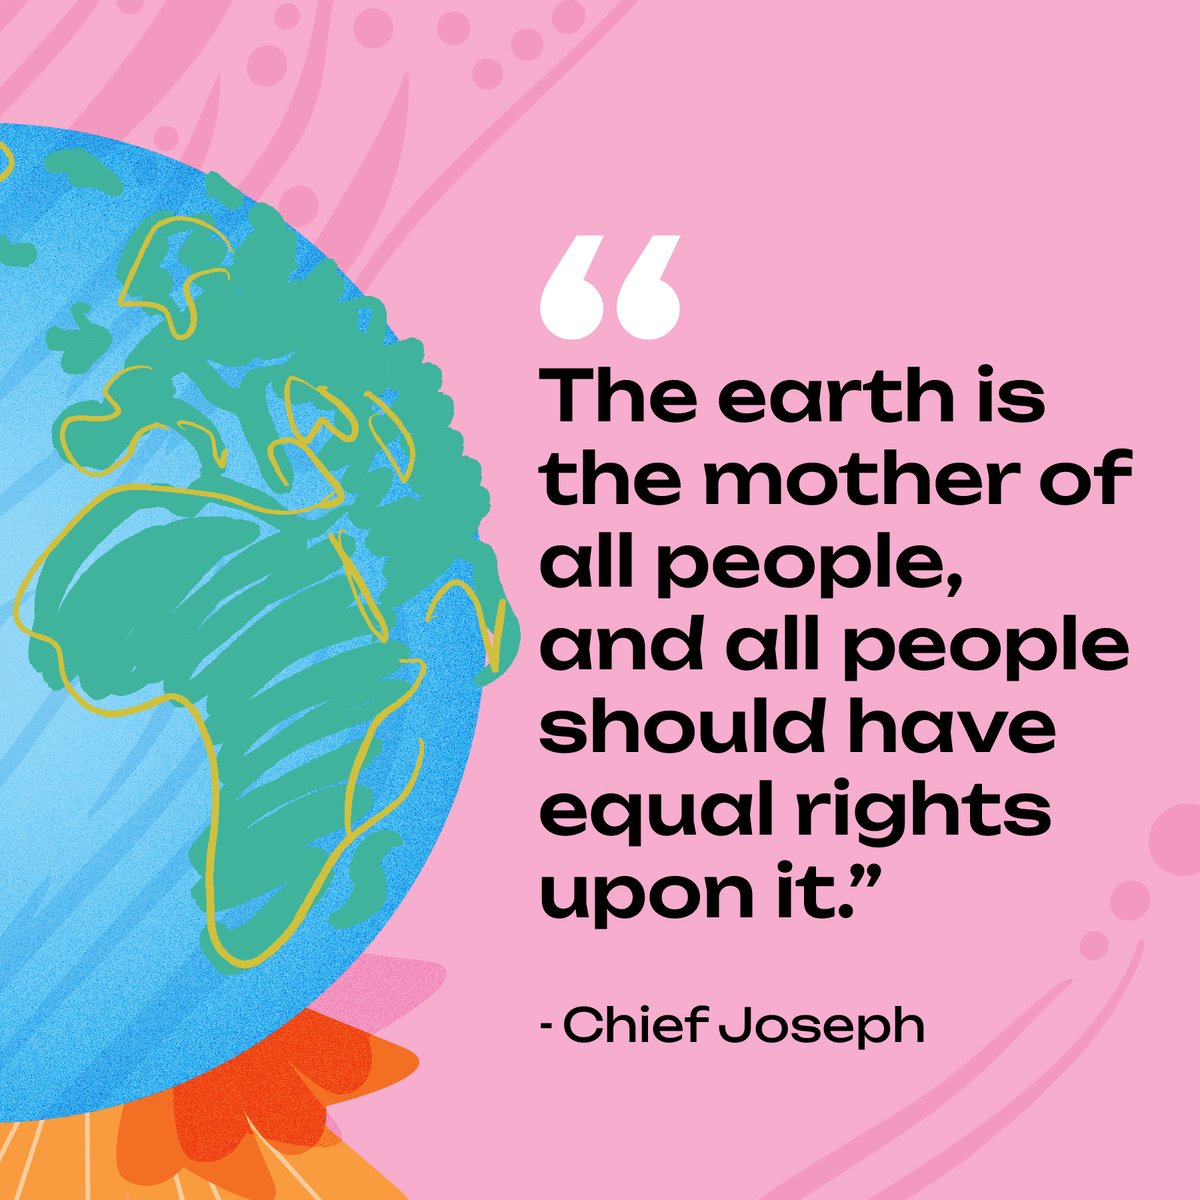 International #MotherEarthDay highlights our planet's beauty and shows our exploitative actions that have impacted Indigenous communities and the climate. Let's shift from exploitation and champion Indigenous leadership in conservation. #IndigenousRights #Sustainability